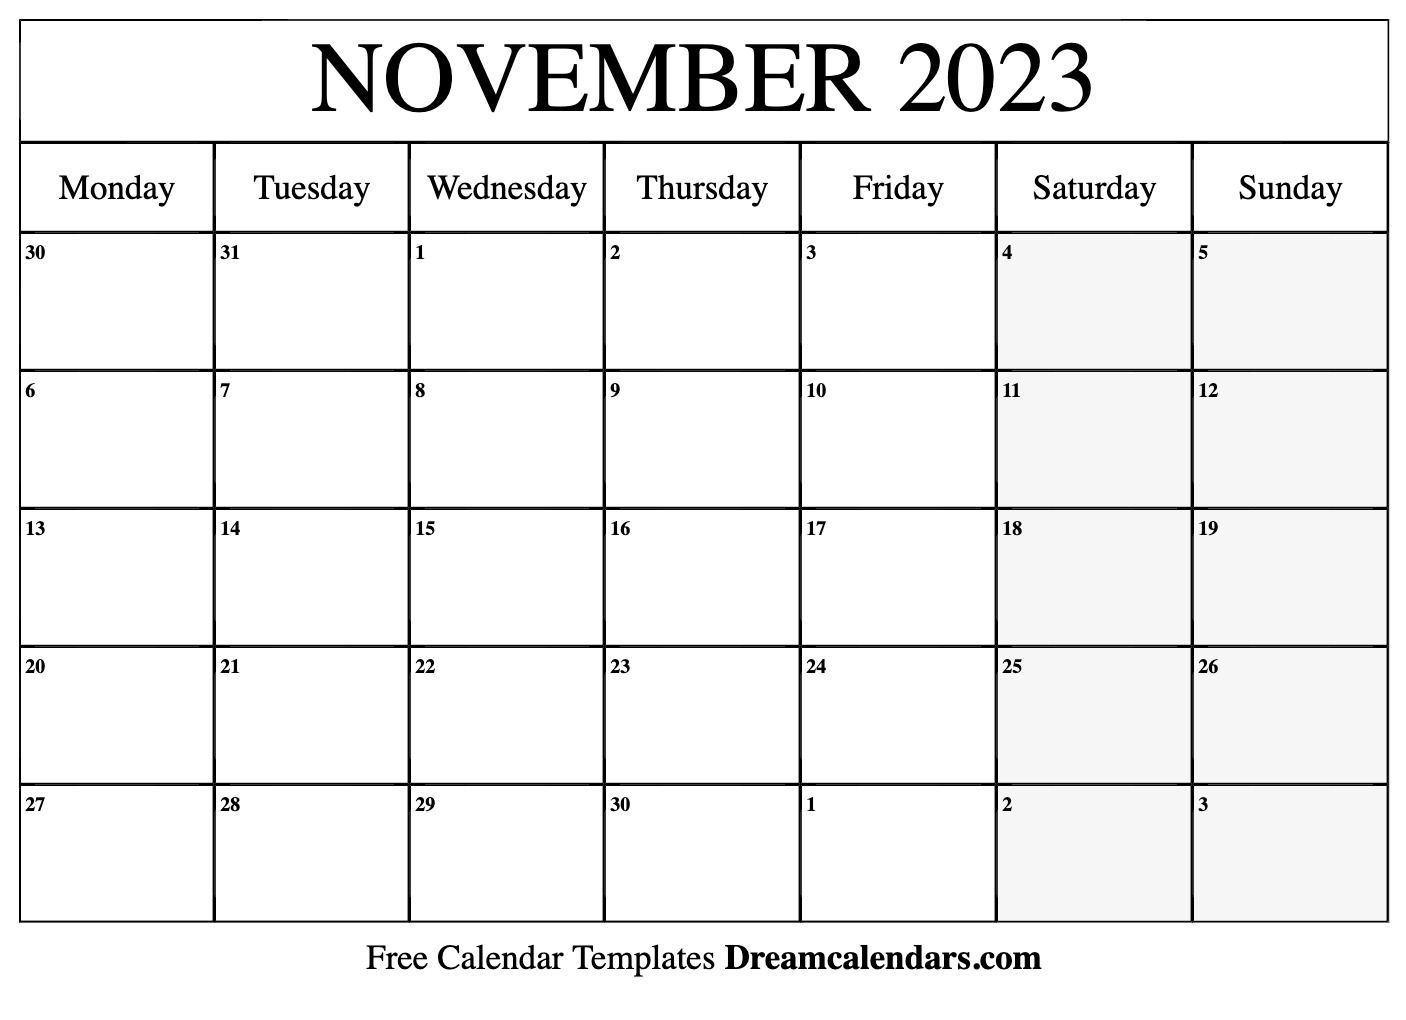 November 2023 Calendar Free Printable with Holidays and Observances